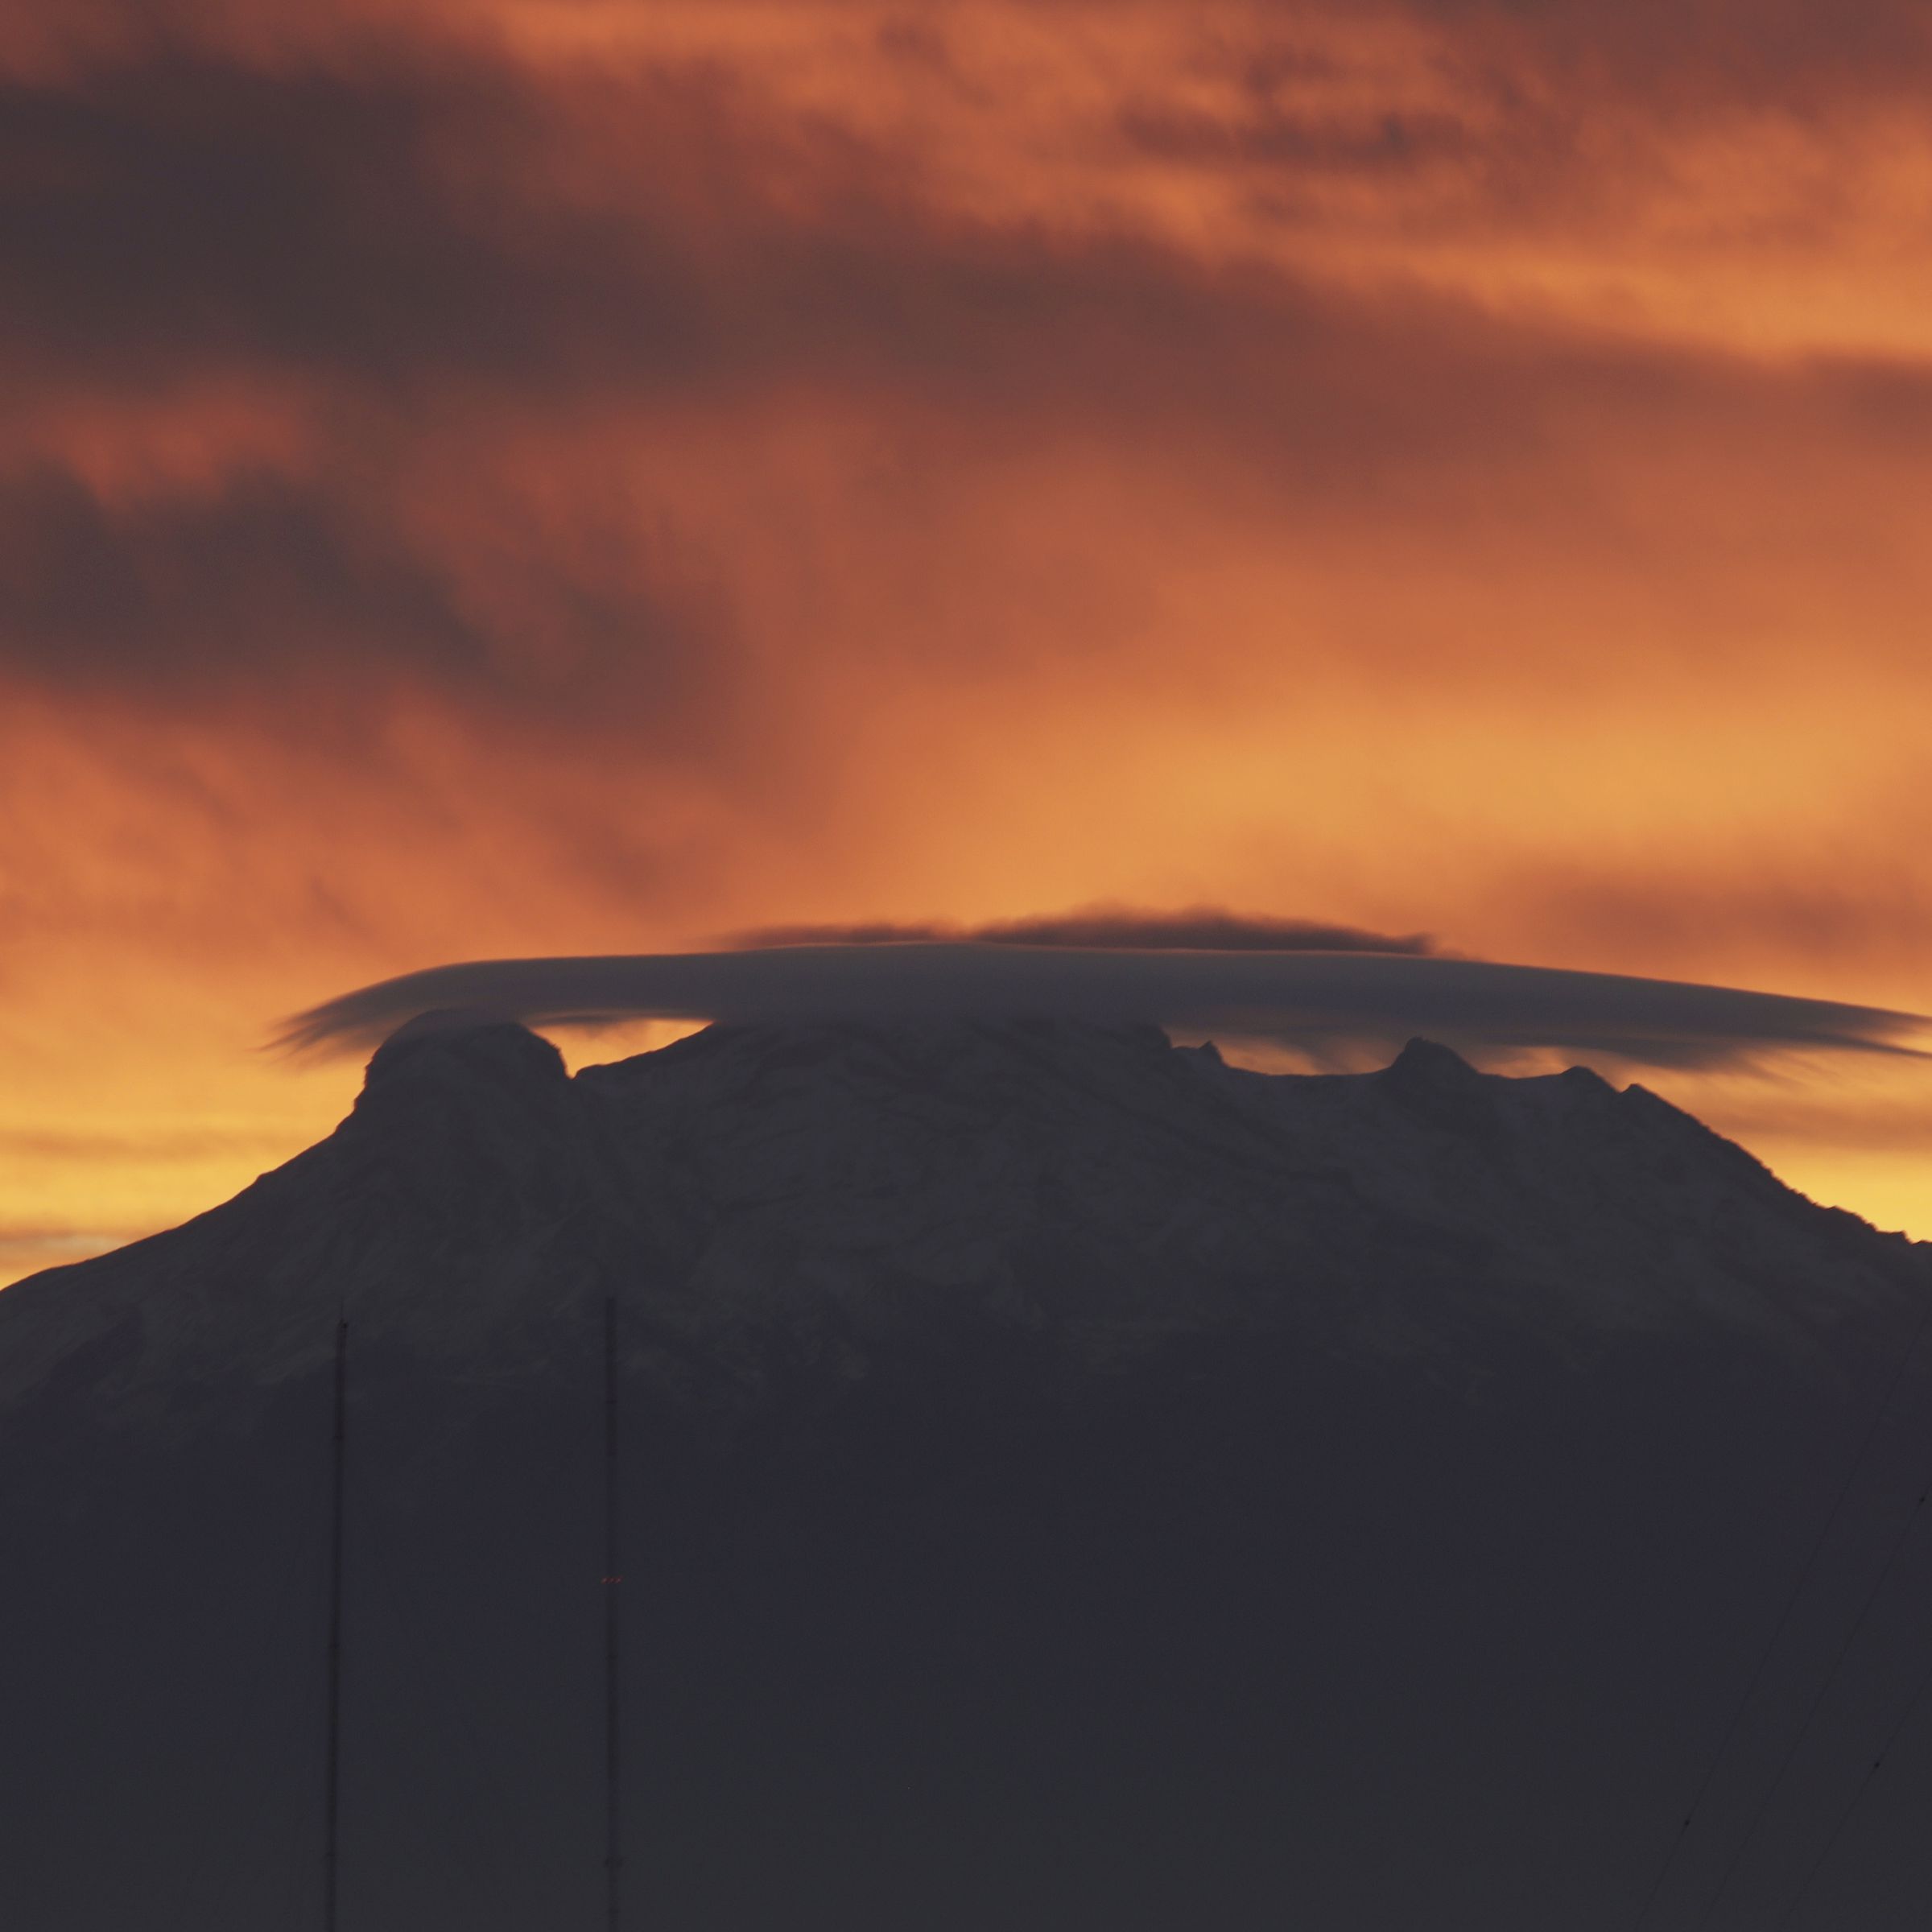 Clouds over a volcano during a bright orange sunrise